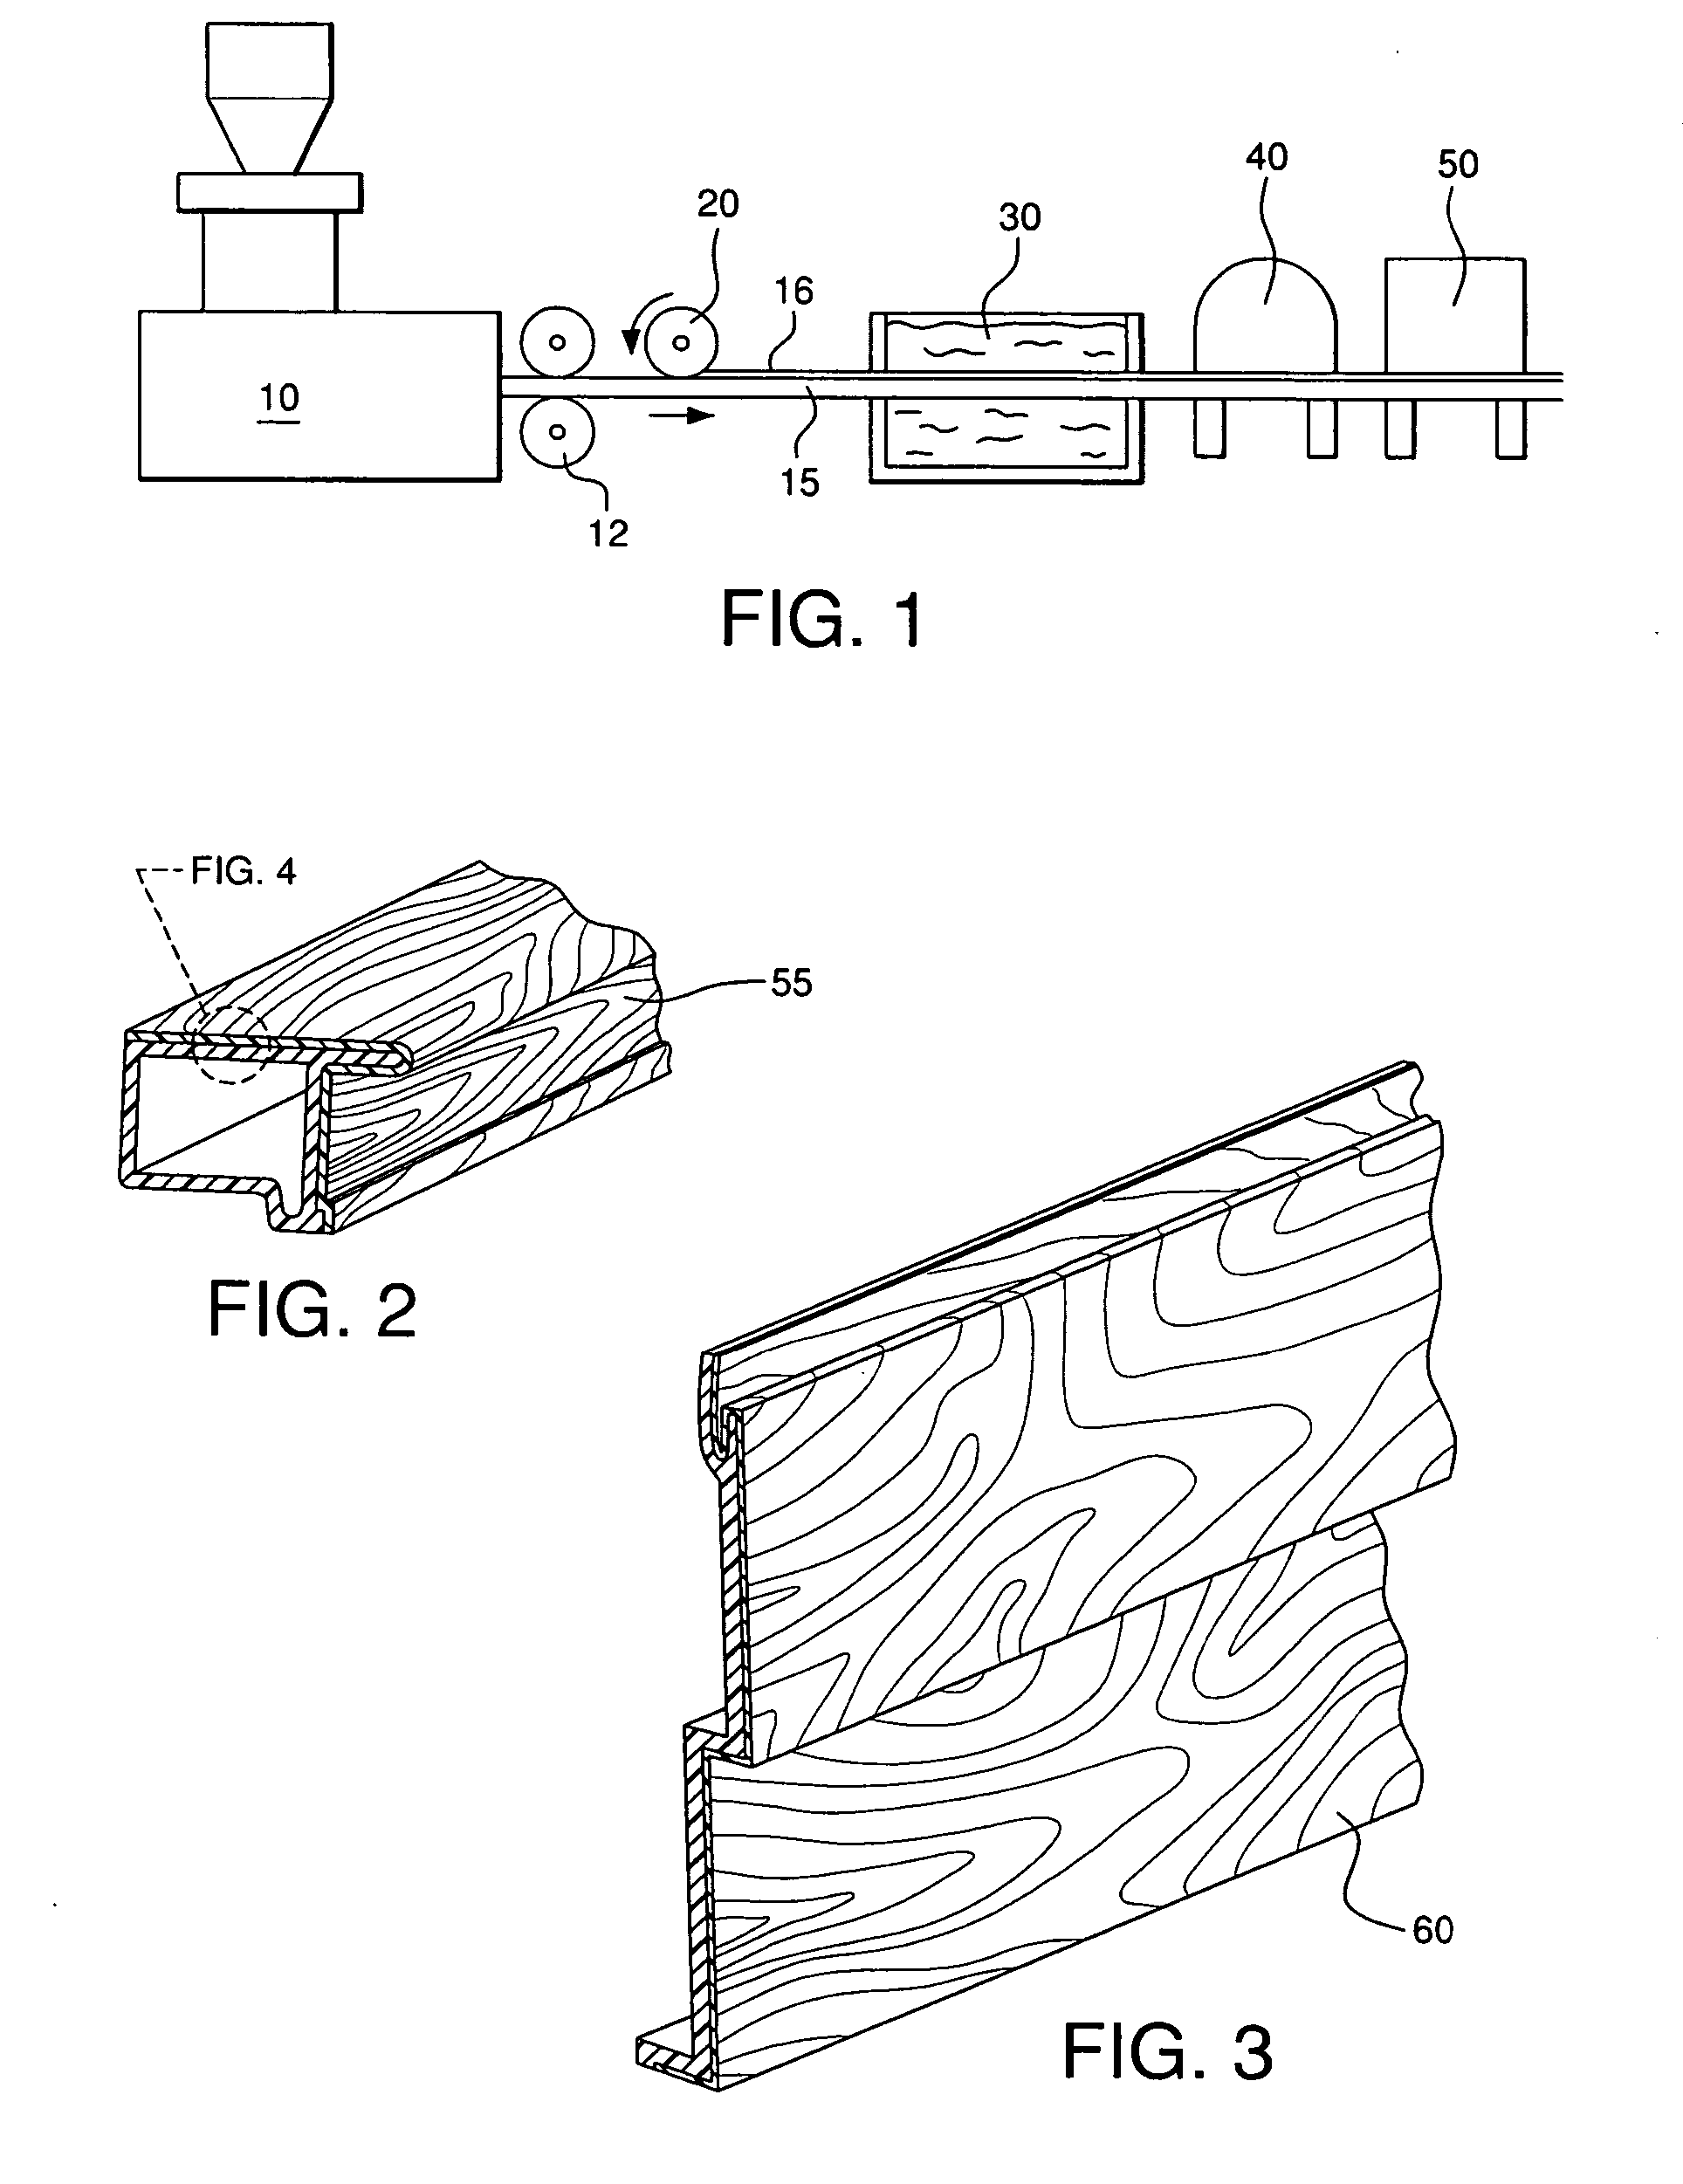 Building material having a fluorocarbon based capstock layer and process of manufacturing same with less dimensional distortion